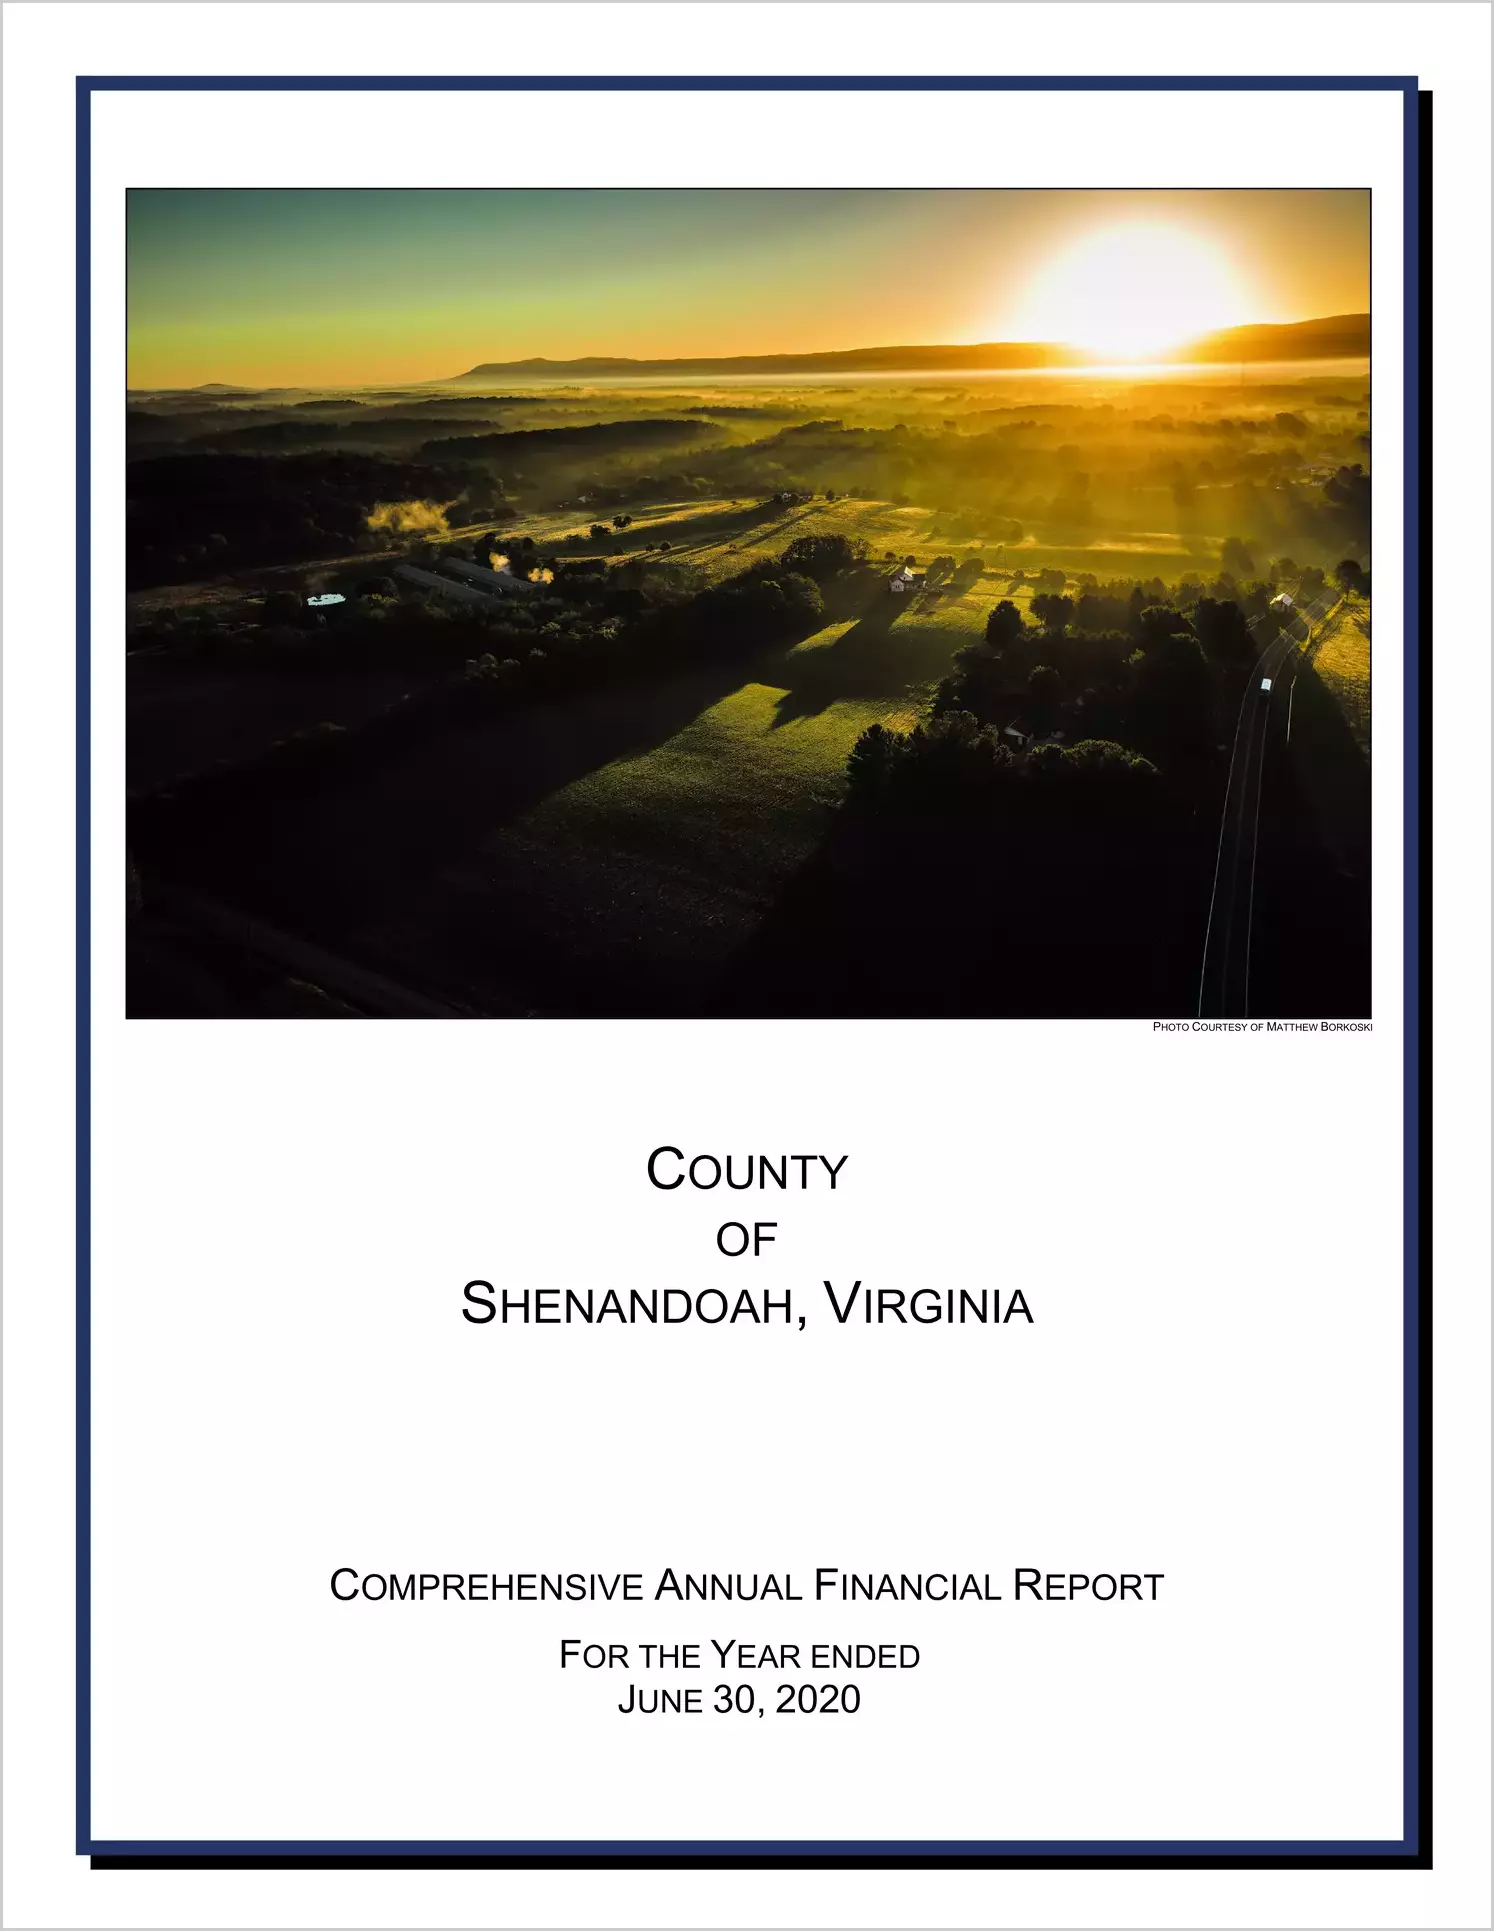 2020 Annual Financial Report for County of Shenandoah